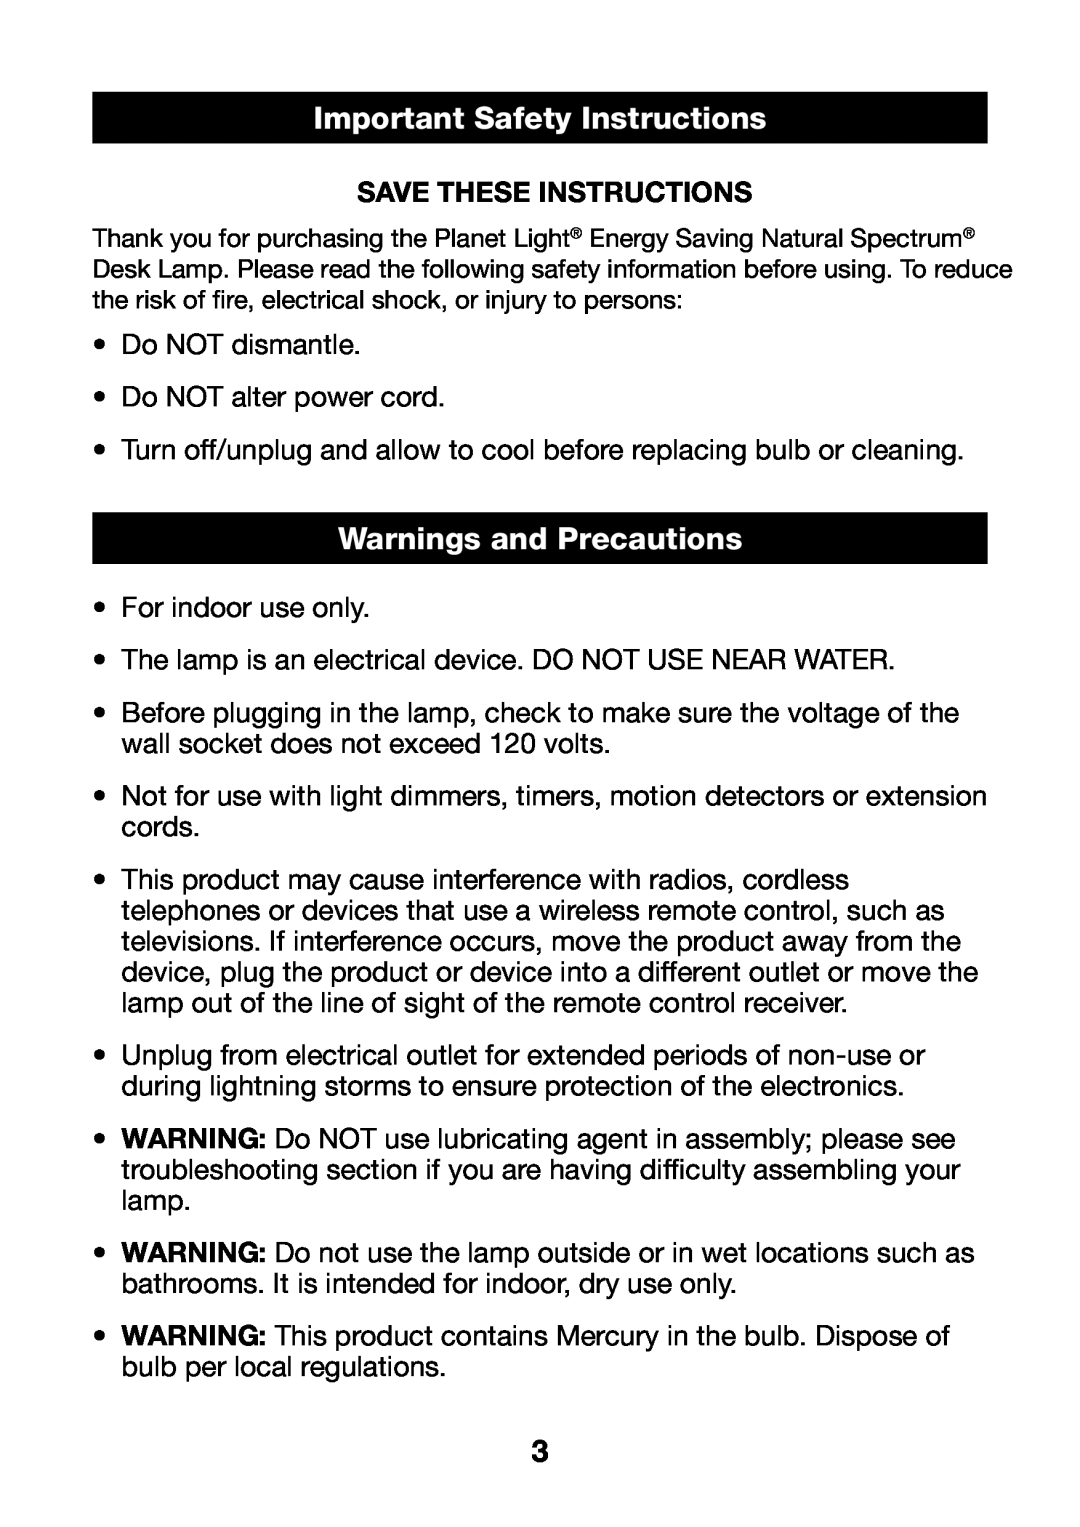 Verilux PL03 manual Important HEADERSafetyInstructions, Warnings and Precautions, Save These Instructions 